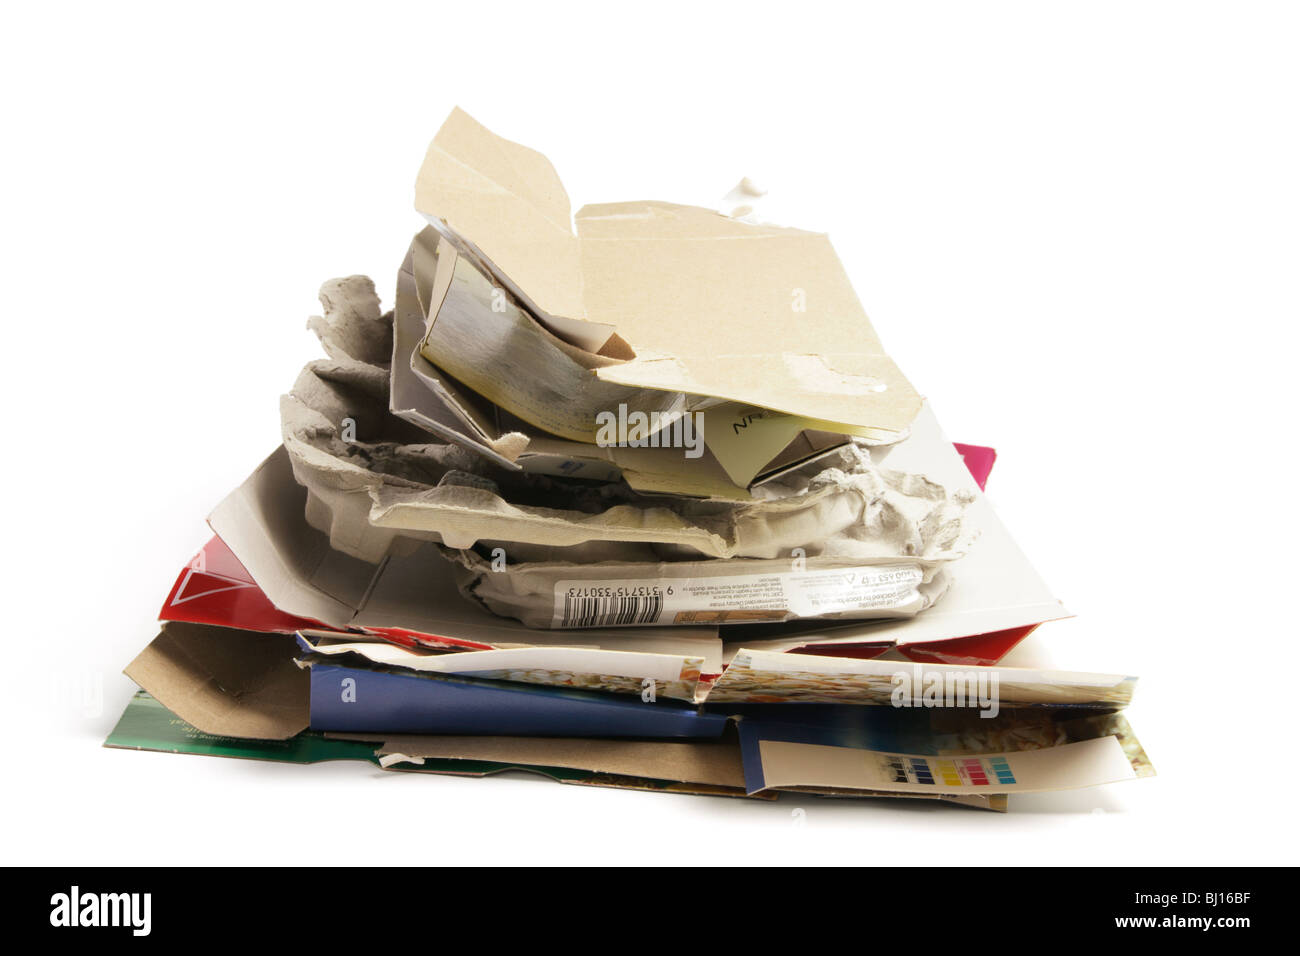 Pile of Waste Paper Products Stock Photo